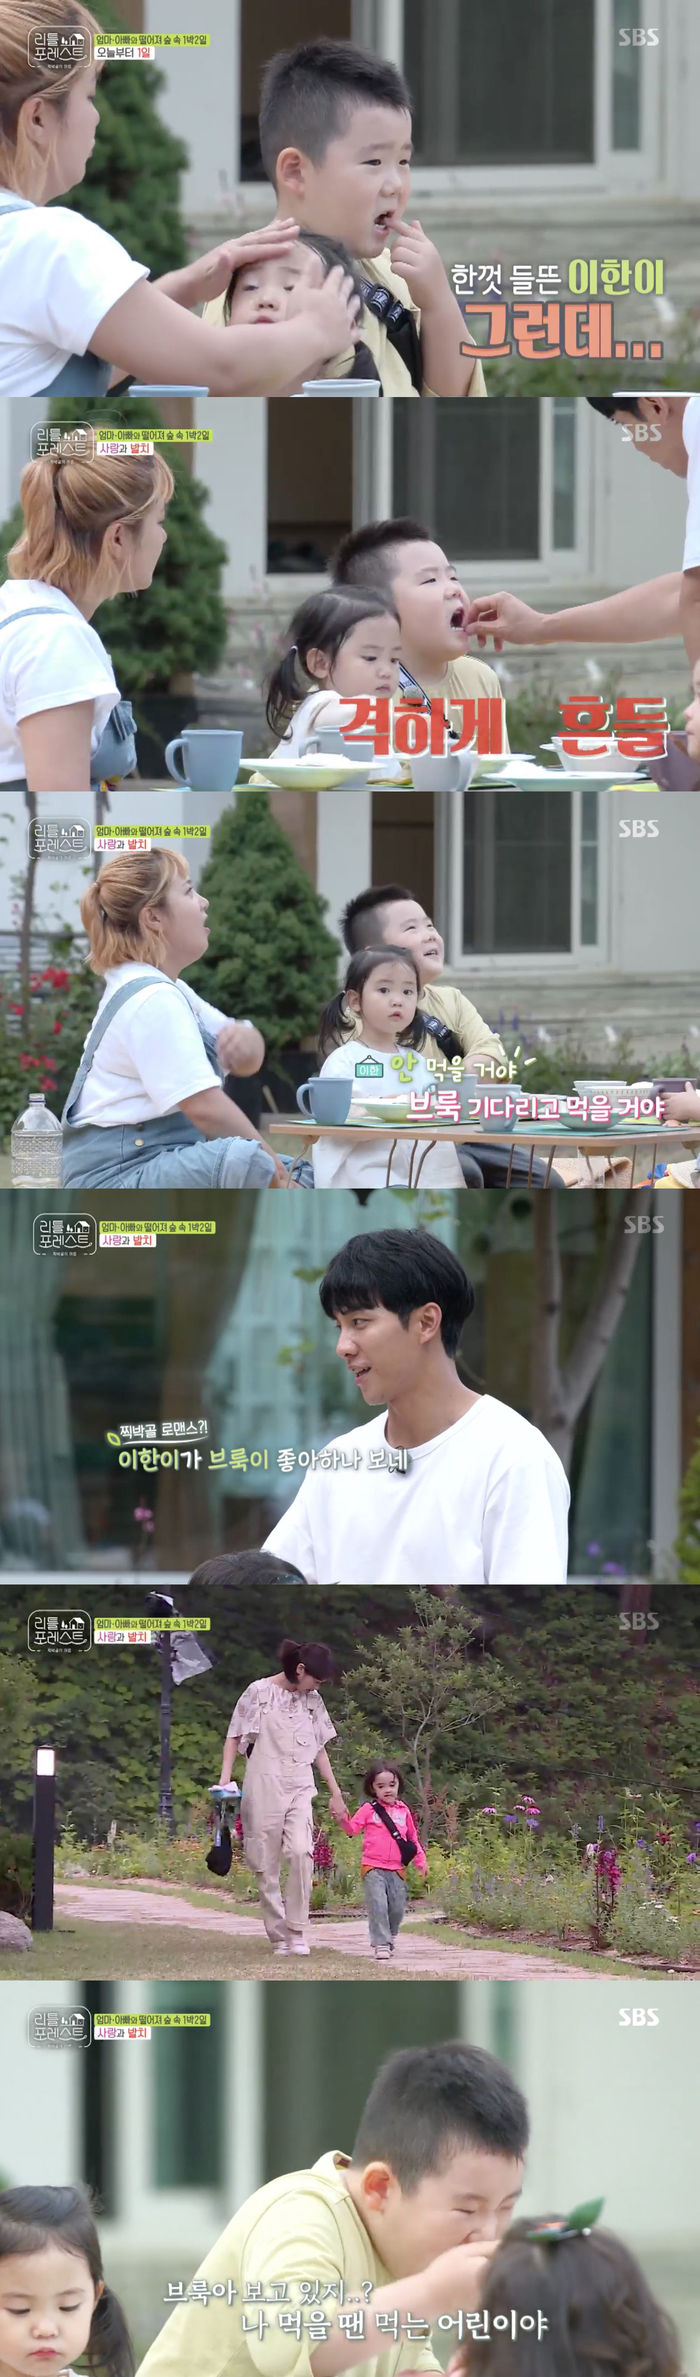 Lee Han-yis heart, which likes Brooke, has warmed up.On SBS Little Forest broadcasted on the 19th, Little people who were having dinner were drawn.On the show, the first one headed to the table faster than anyone else. Lee even sang a song on Steak made by Lee Seo-jin.Lee Seung-gi, who saw it, asked, Would you like to shake it or not? Lee Seo-jin said, Except now, its Pina.In particular, Lee said, My mother wants to eat. Lee Seung-gi and Park Na-rae poured out ghost stories about the shaking.Lee said, I do not want to do it. Can not you eat or not eat? Can not you do it tomorrow?Lee said, Why arent you coming? And Lee said, Im not going to eat, Im going to wait until Brooke comes.In fact, Lee Han was more affectionate to Brooke than anyone else, and Lee Seung-gi said, Lee seems to like Brooke.Even in the story of Uncle Lee Seung-gi, Lee Han-i kept waiting for Brooke.Lee endured the hunger, and as soon as Brooke sat down, she ate a storm and gathered her attention.After the meal, Lee Han-is teeth had to be removed immediately. Lee Seung-gi said he would remove Lees teeth.Carefully Lee Seung-gi tried to set foot while shaking Lees teeth, but Lees teeth did not fall easily.Lee said, It hurts so much. I want to not take it out.In particular, Lee said that Lee Seung-gis thread to remove it was more scary than deer worms.